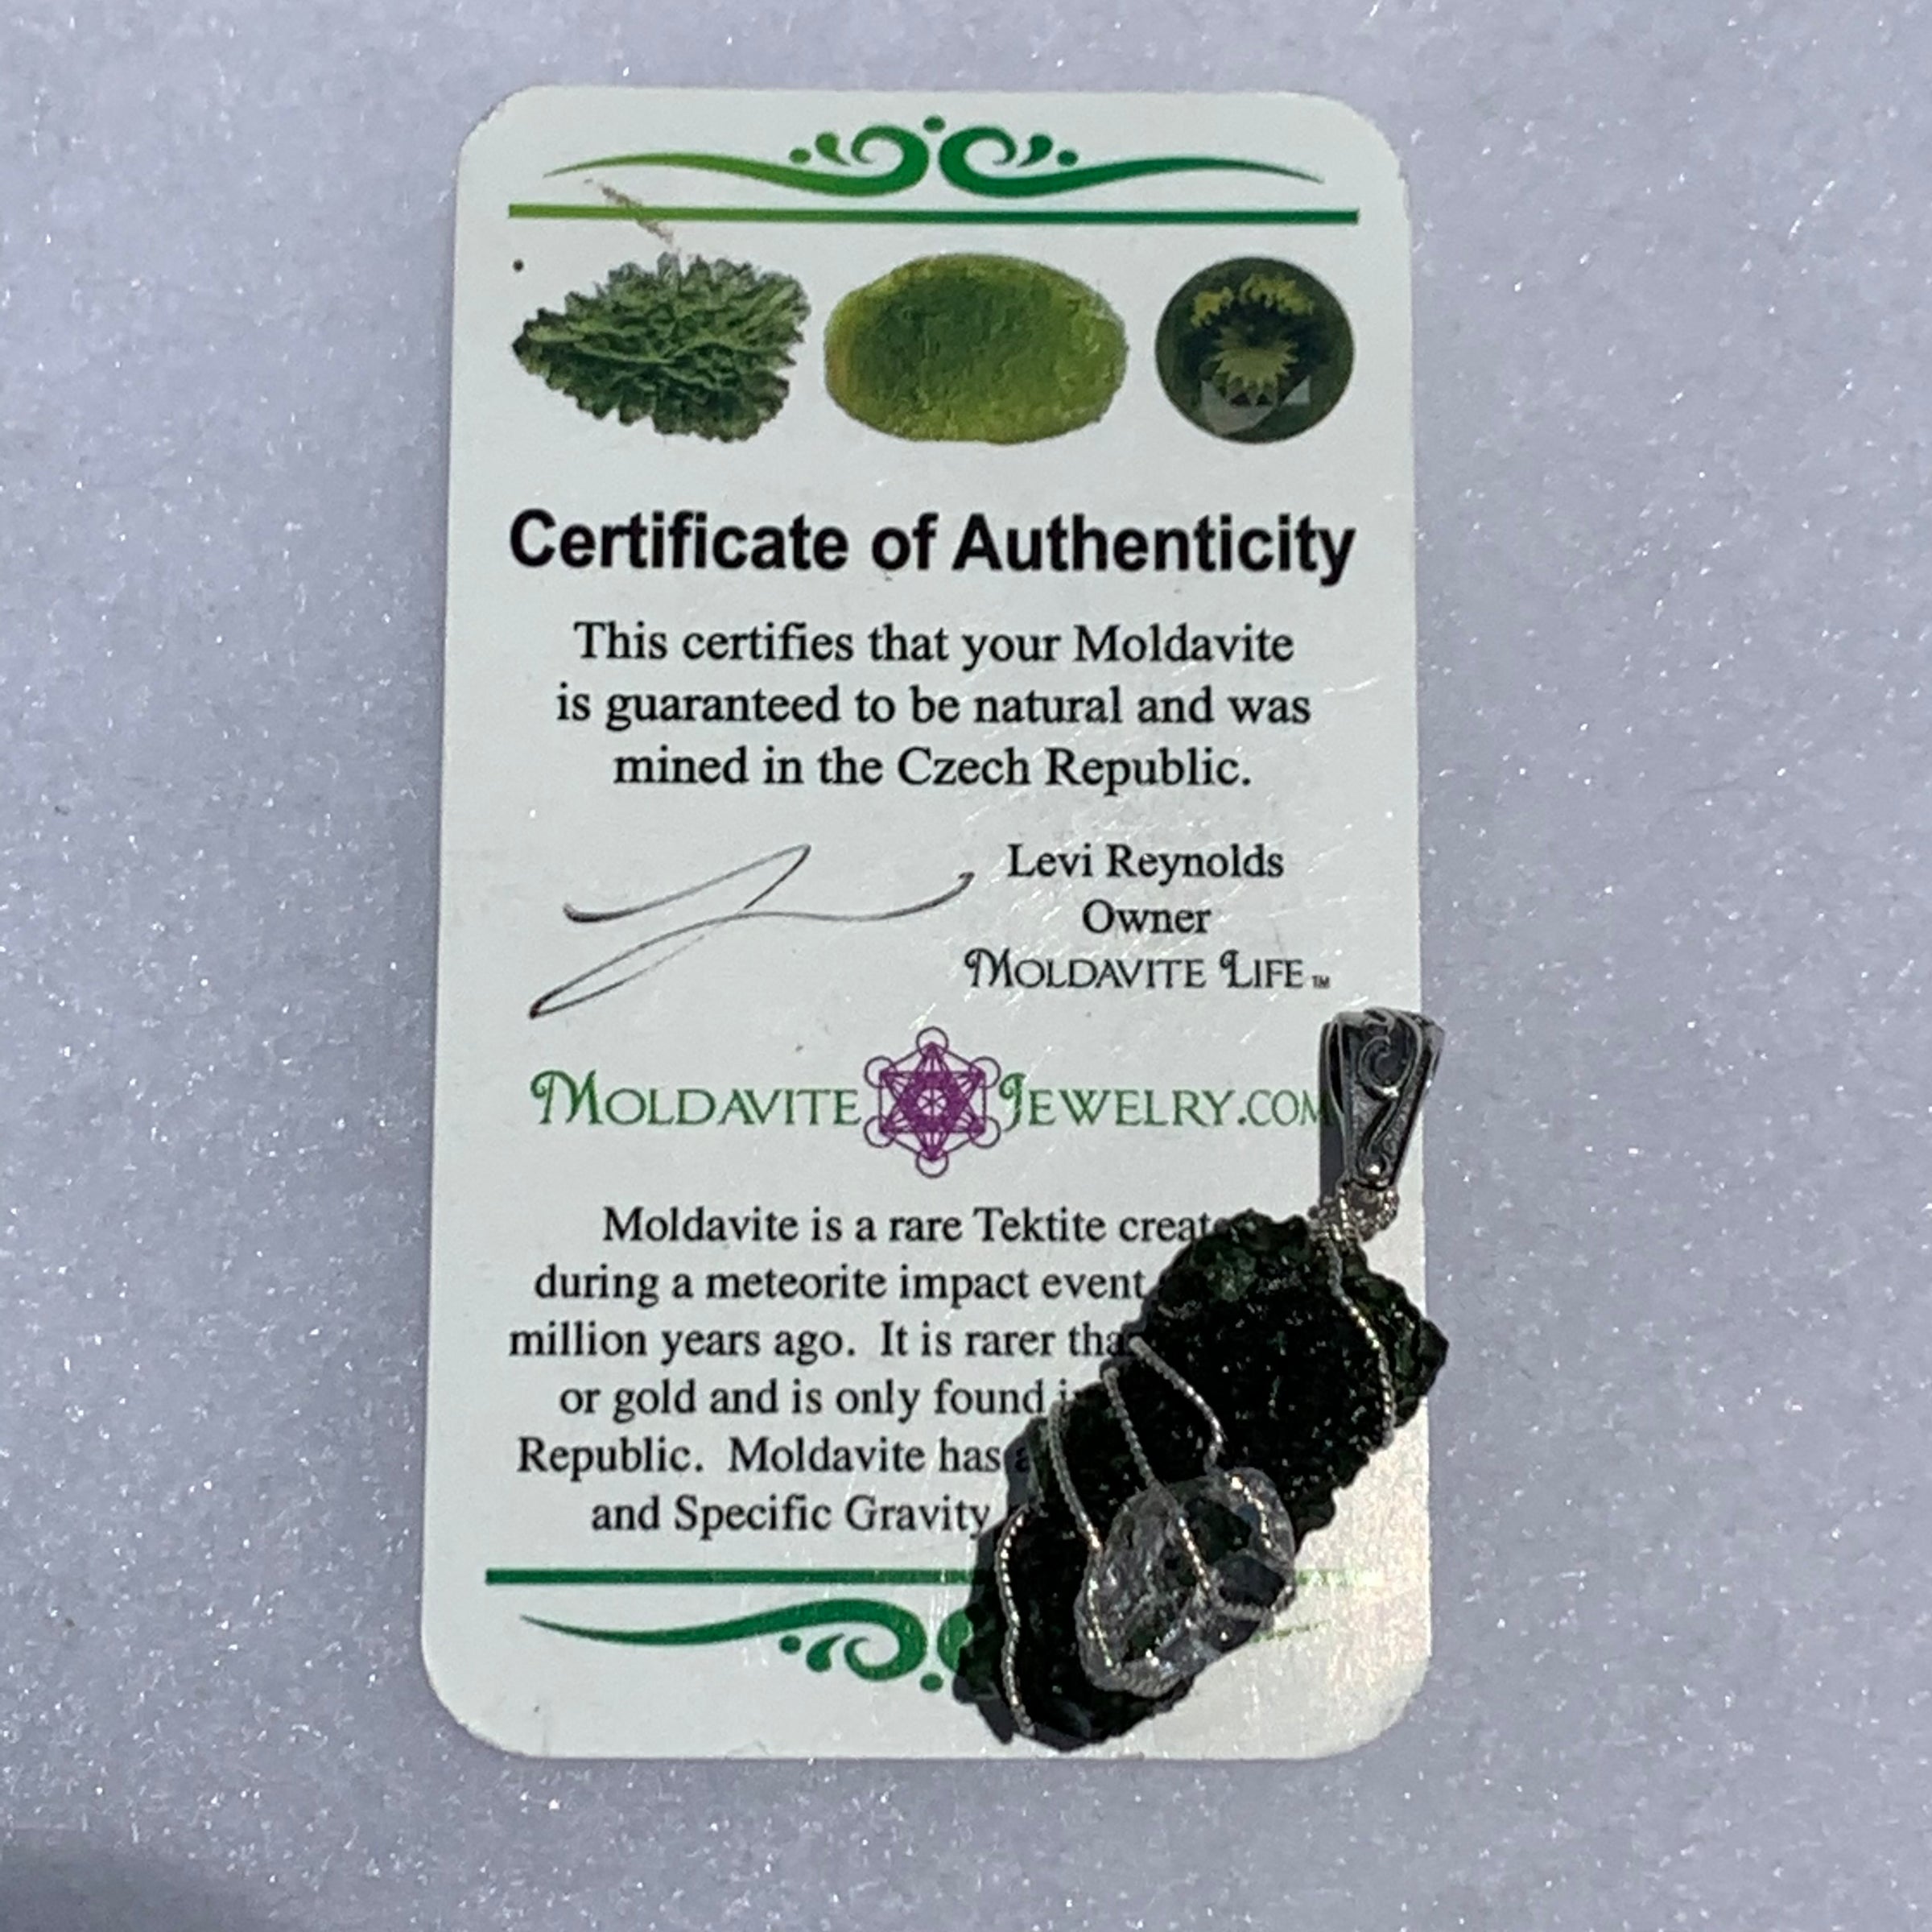 the pendant comes with a certificate of authenticity for the moldavite from moldavite life